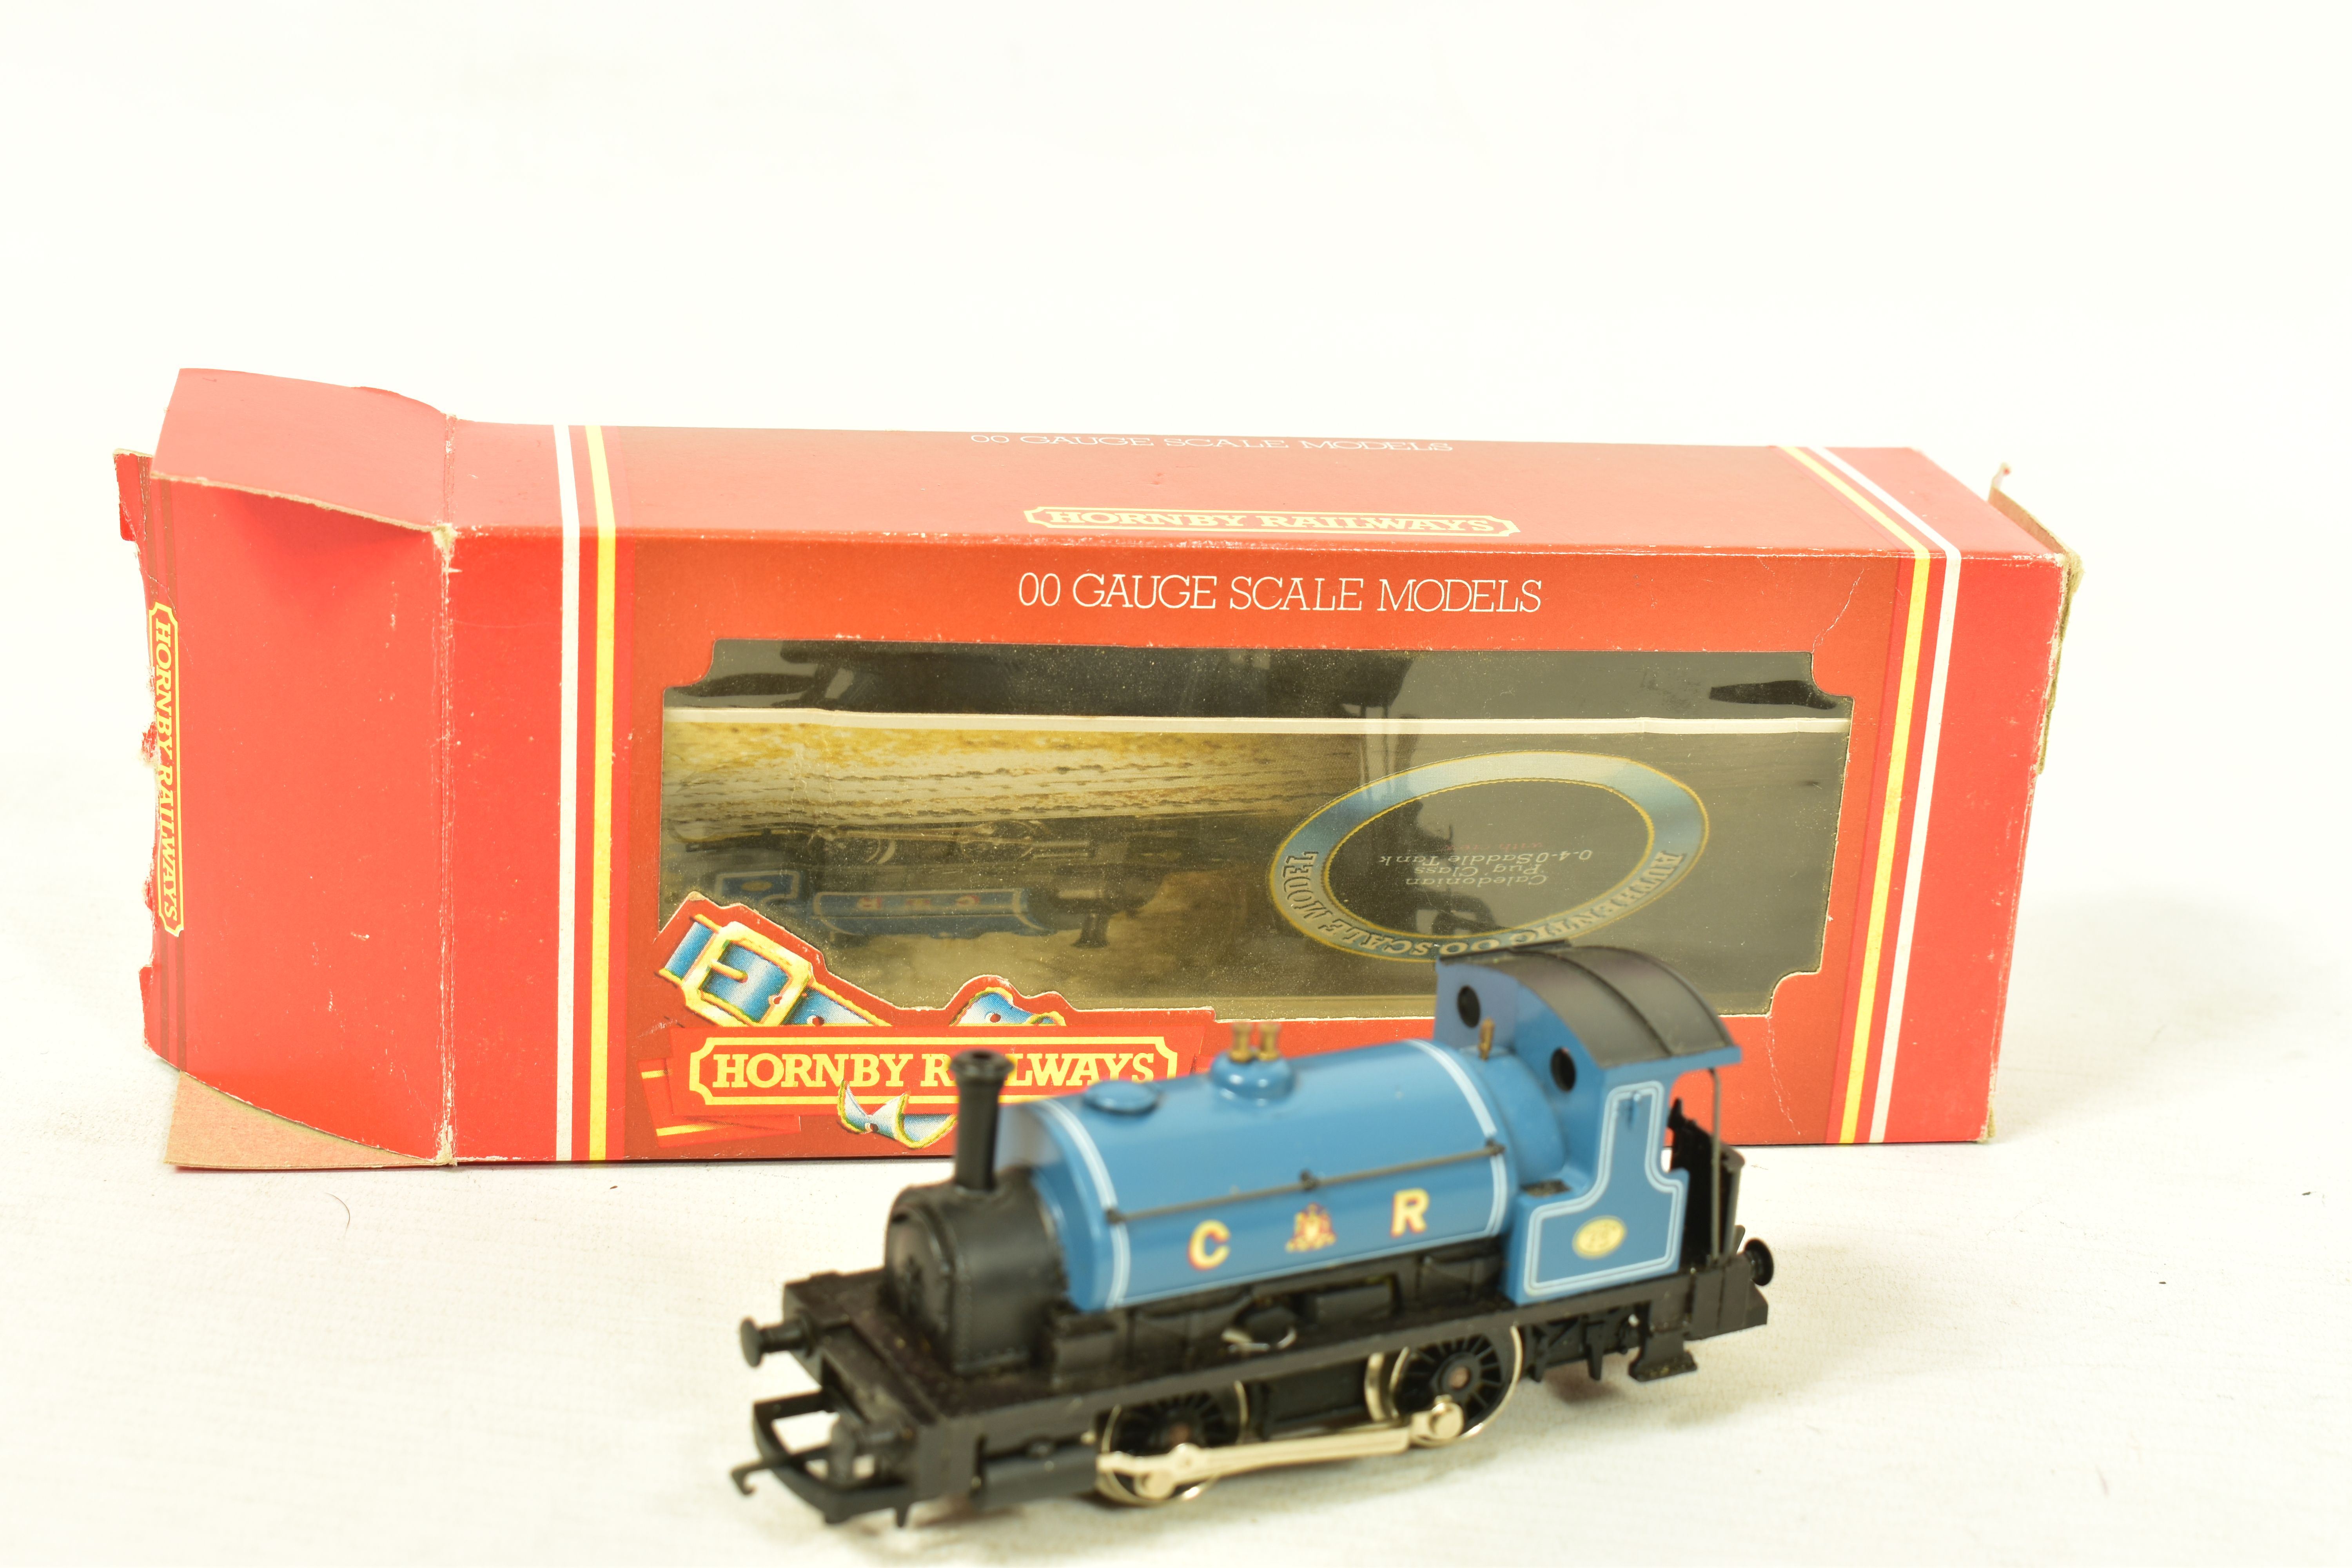 FIVE BOXED HORNBY OO GAUGE CLASS 0F PUG SADDLE TANK LOCOMOTIVES, 2 x No.270, C.R. blue livery ( - Image 6 of 6